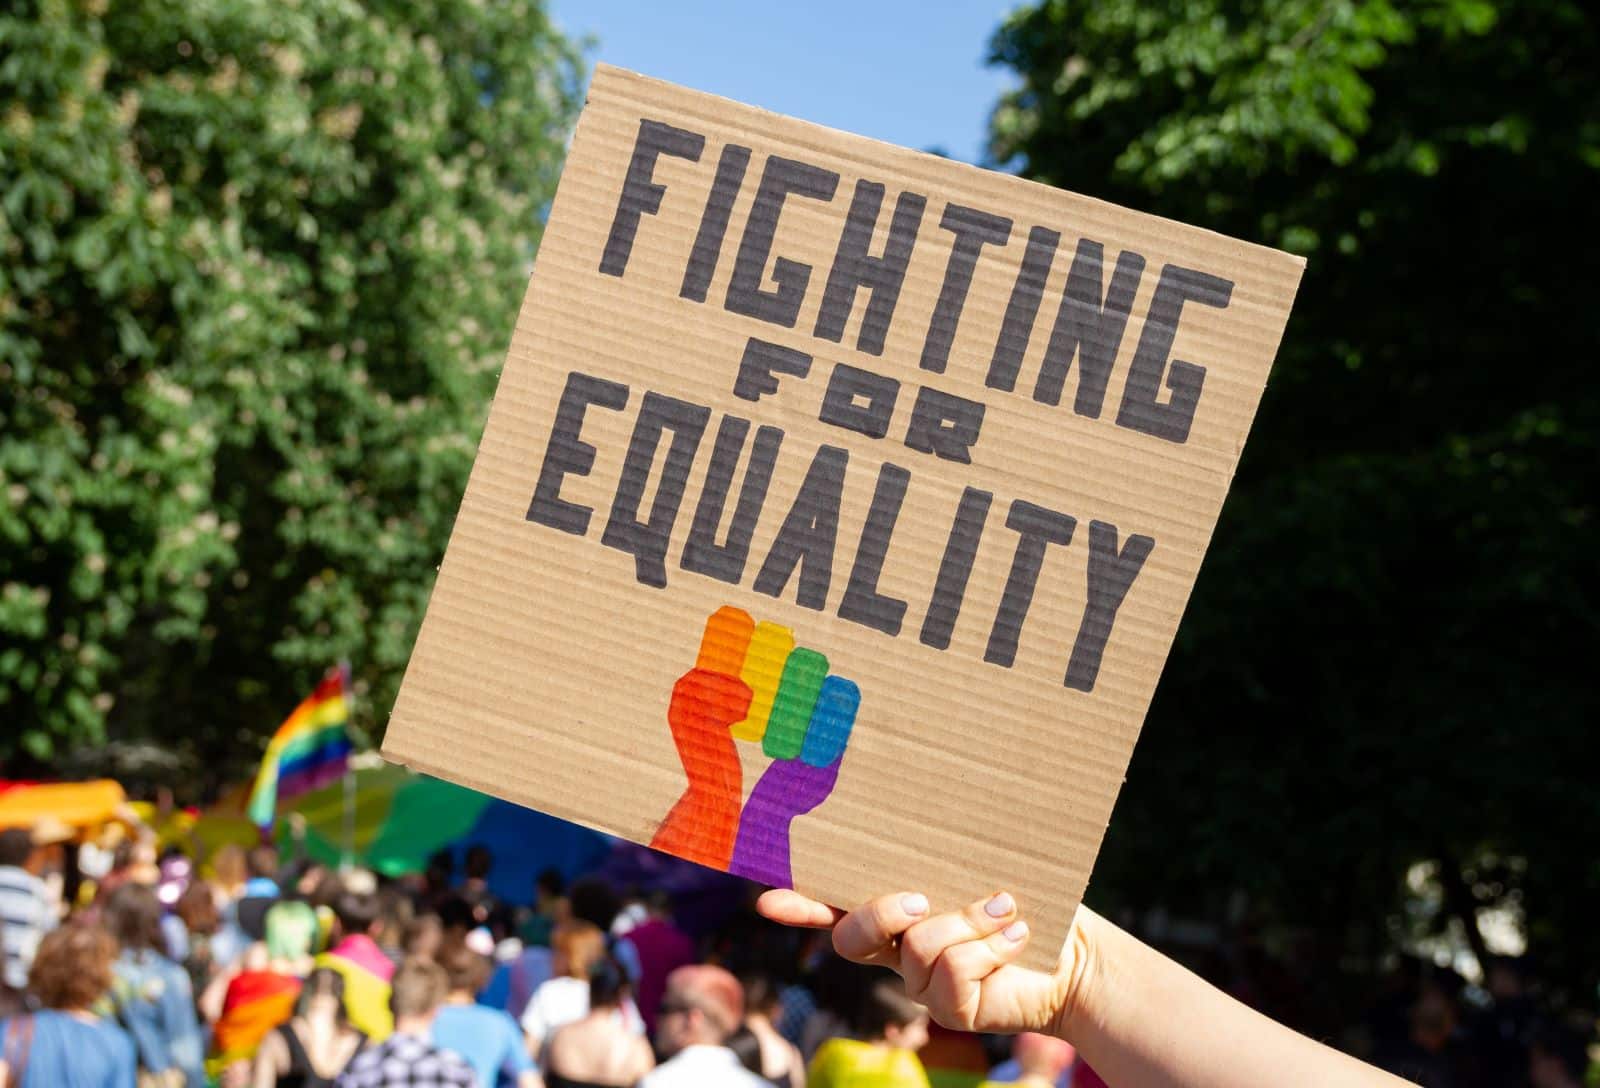 Image Credit: Shutterstock / Longfin Media <p><span>The legal debate focused on the definition of marriage, with petitioners emphasizing that marriage extends to two individuals, irrespective of gender. </span></p> <p><span>They argued that denying same-sex couples recognition was a violation of constitutional equality rights, impacting various aspects such as adoption, insurance, pensions, and inheritance.</span></p>